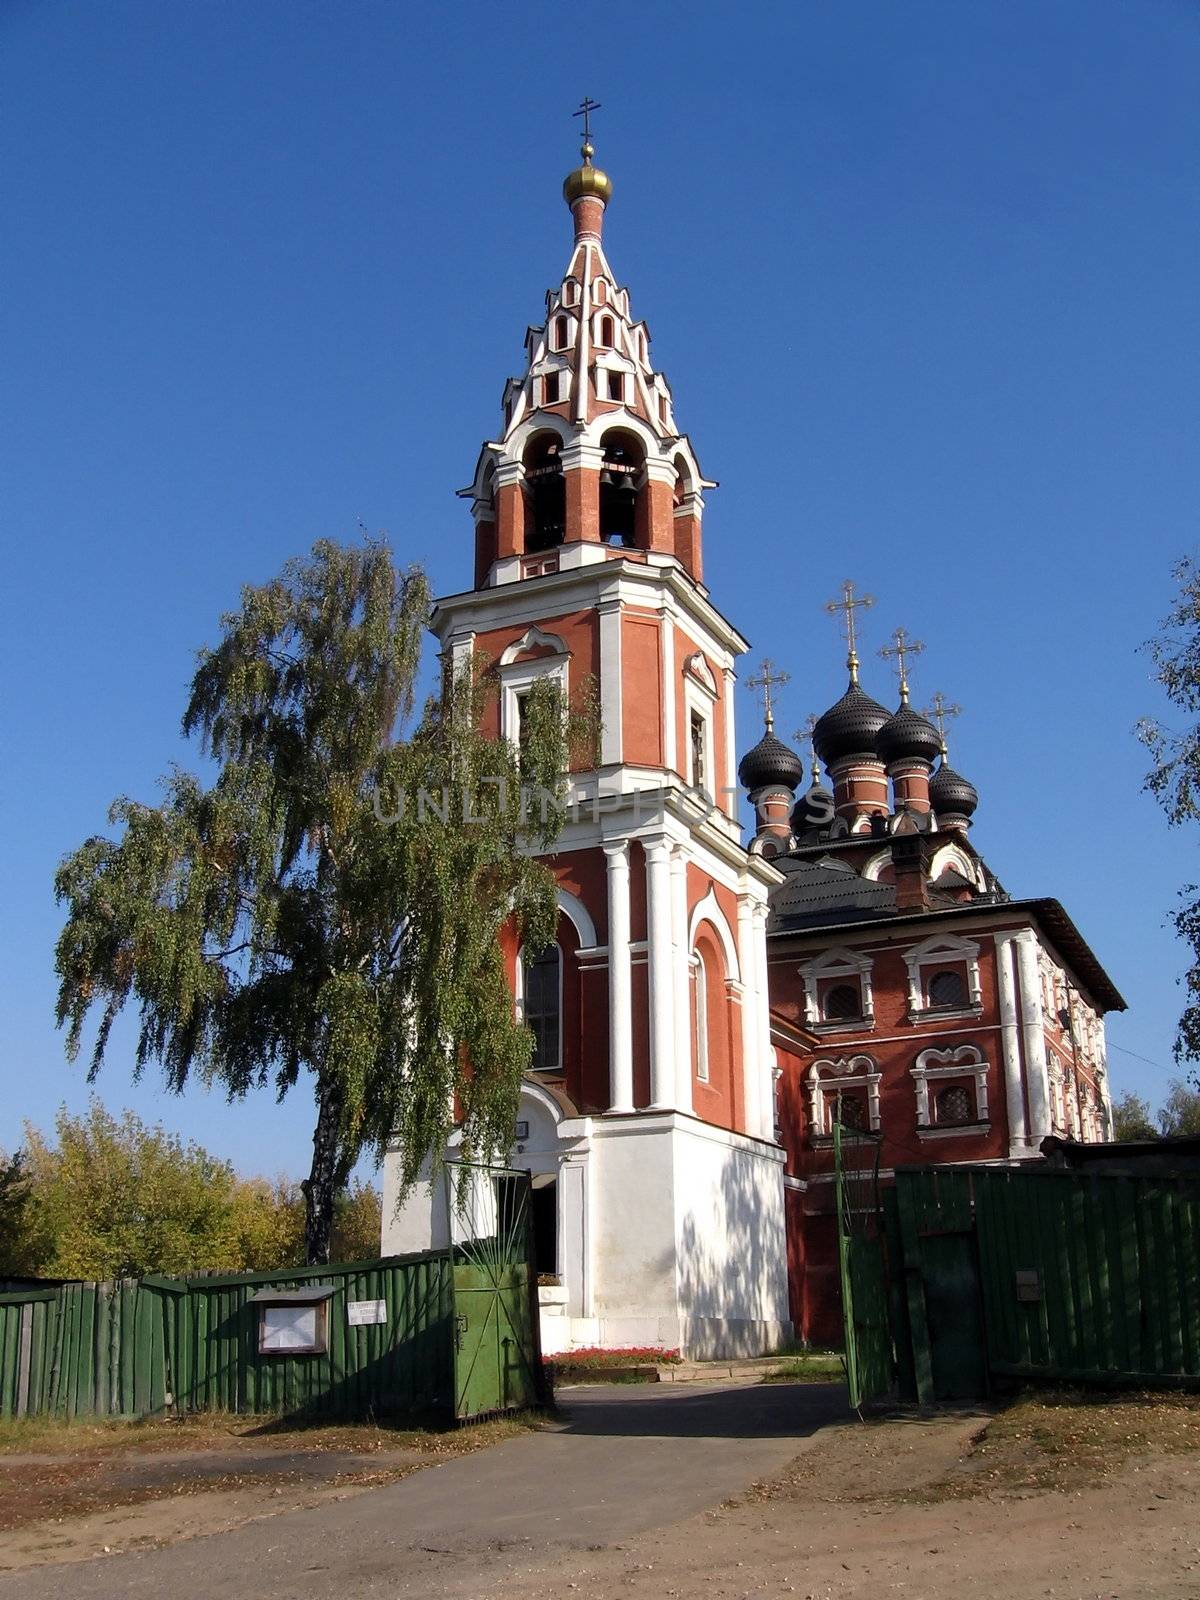 Red Russian church on a background of blue sky